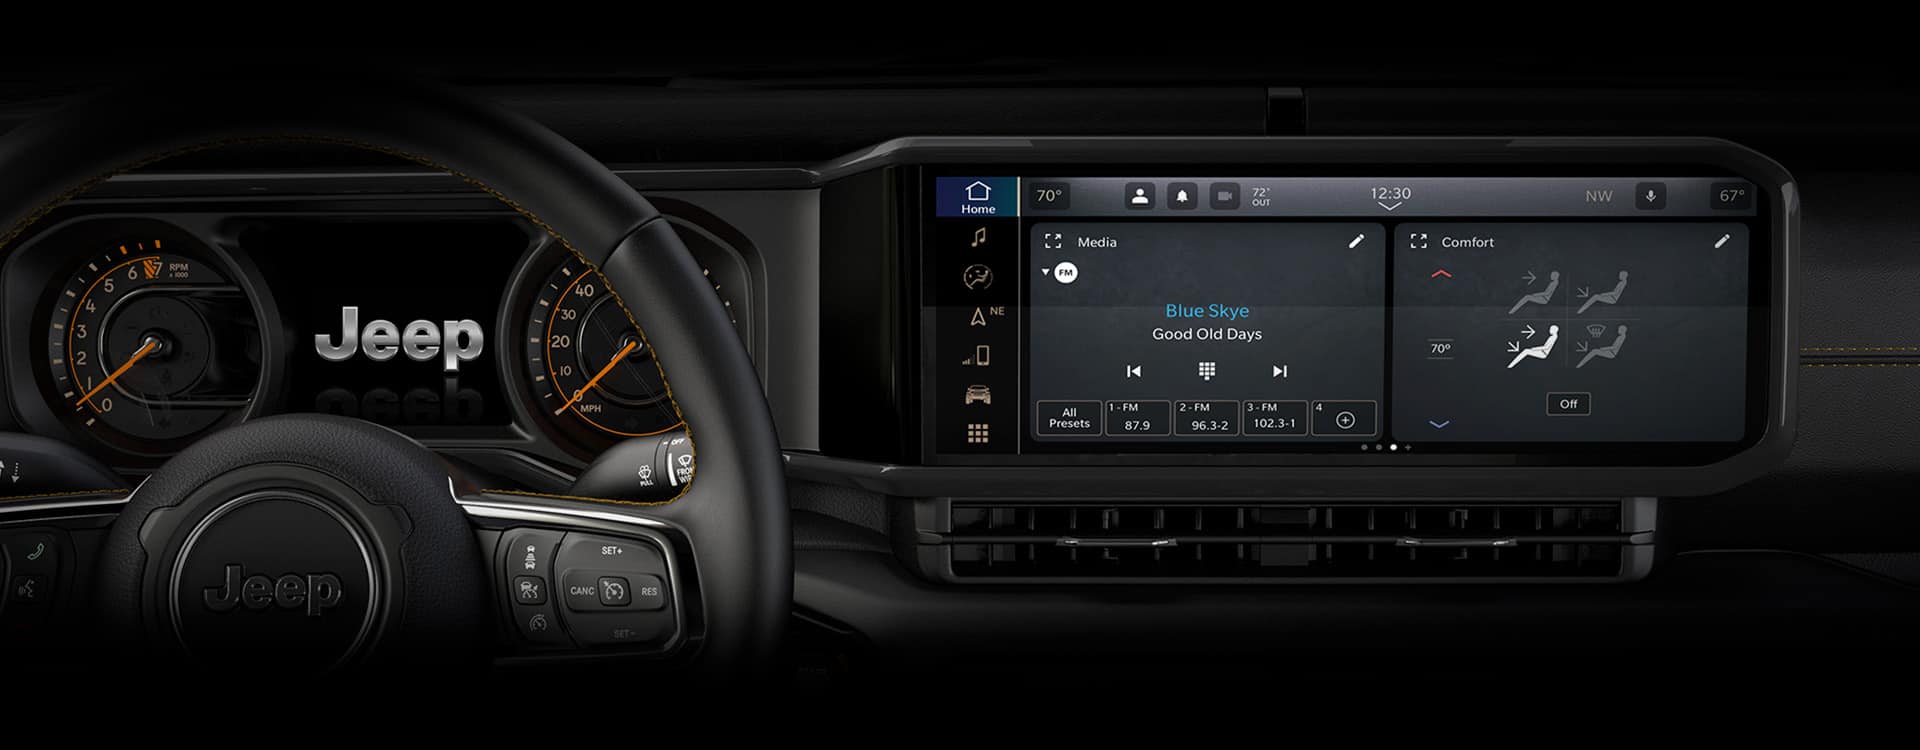 The Driver Information Digital Cluster and Uconnect touchscreen in the 2024 Jeep Gladiator, with an audio selection and climate controls displayed on the touchscreen.